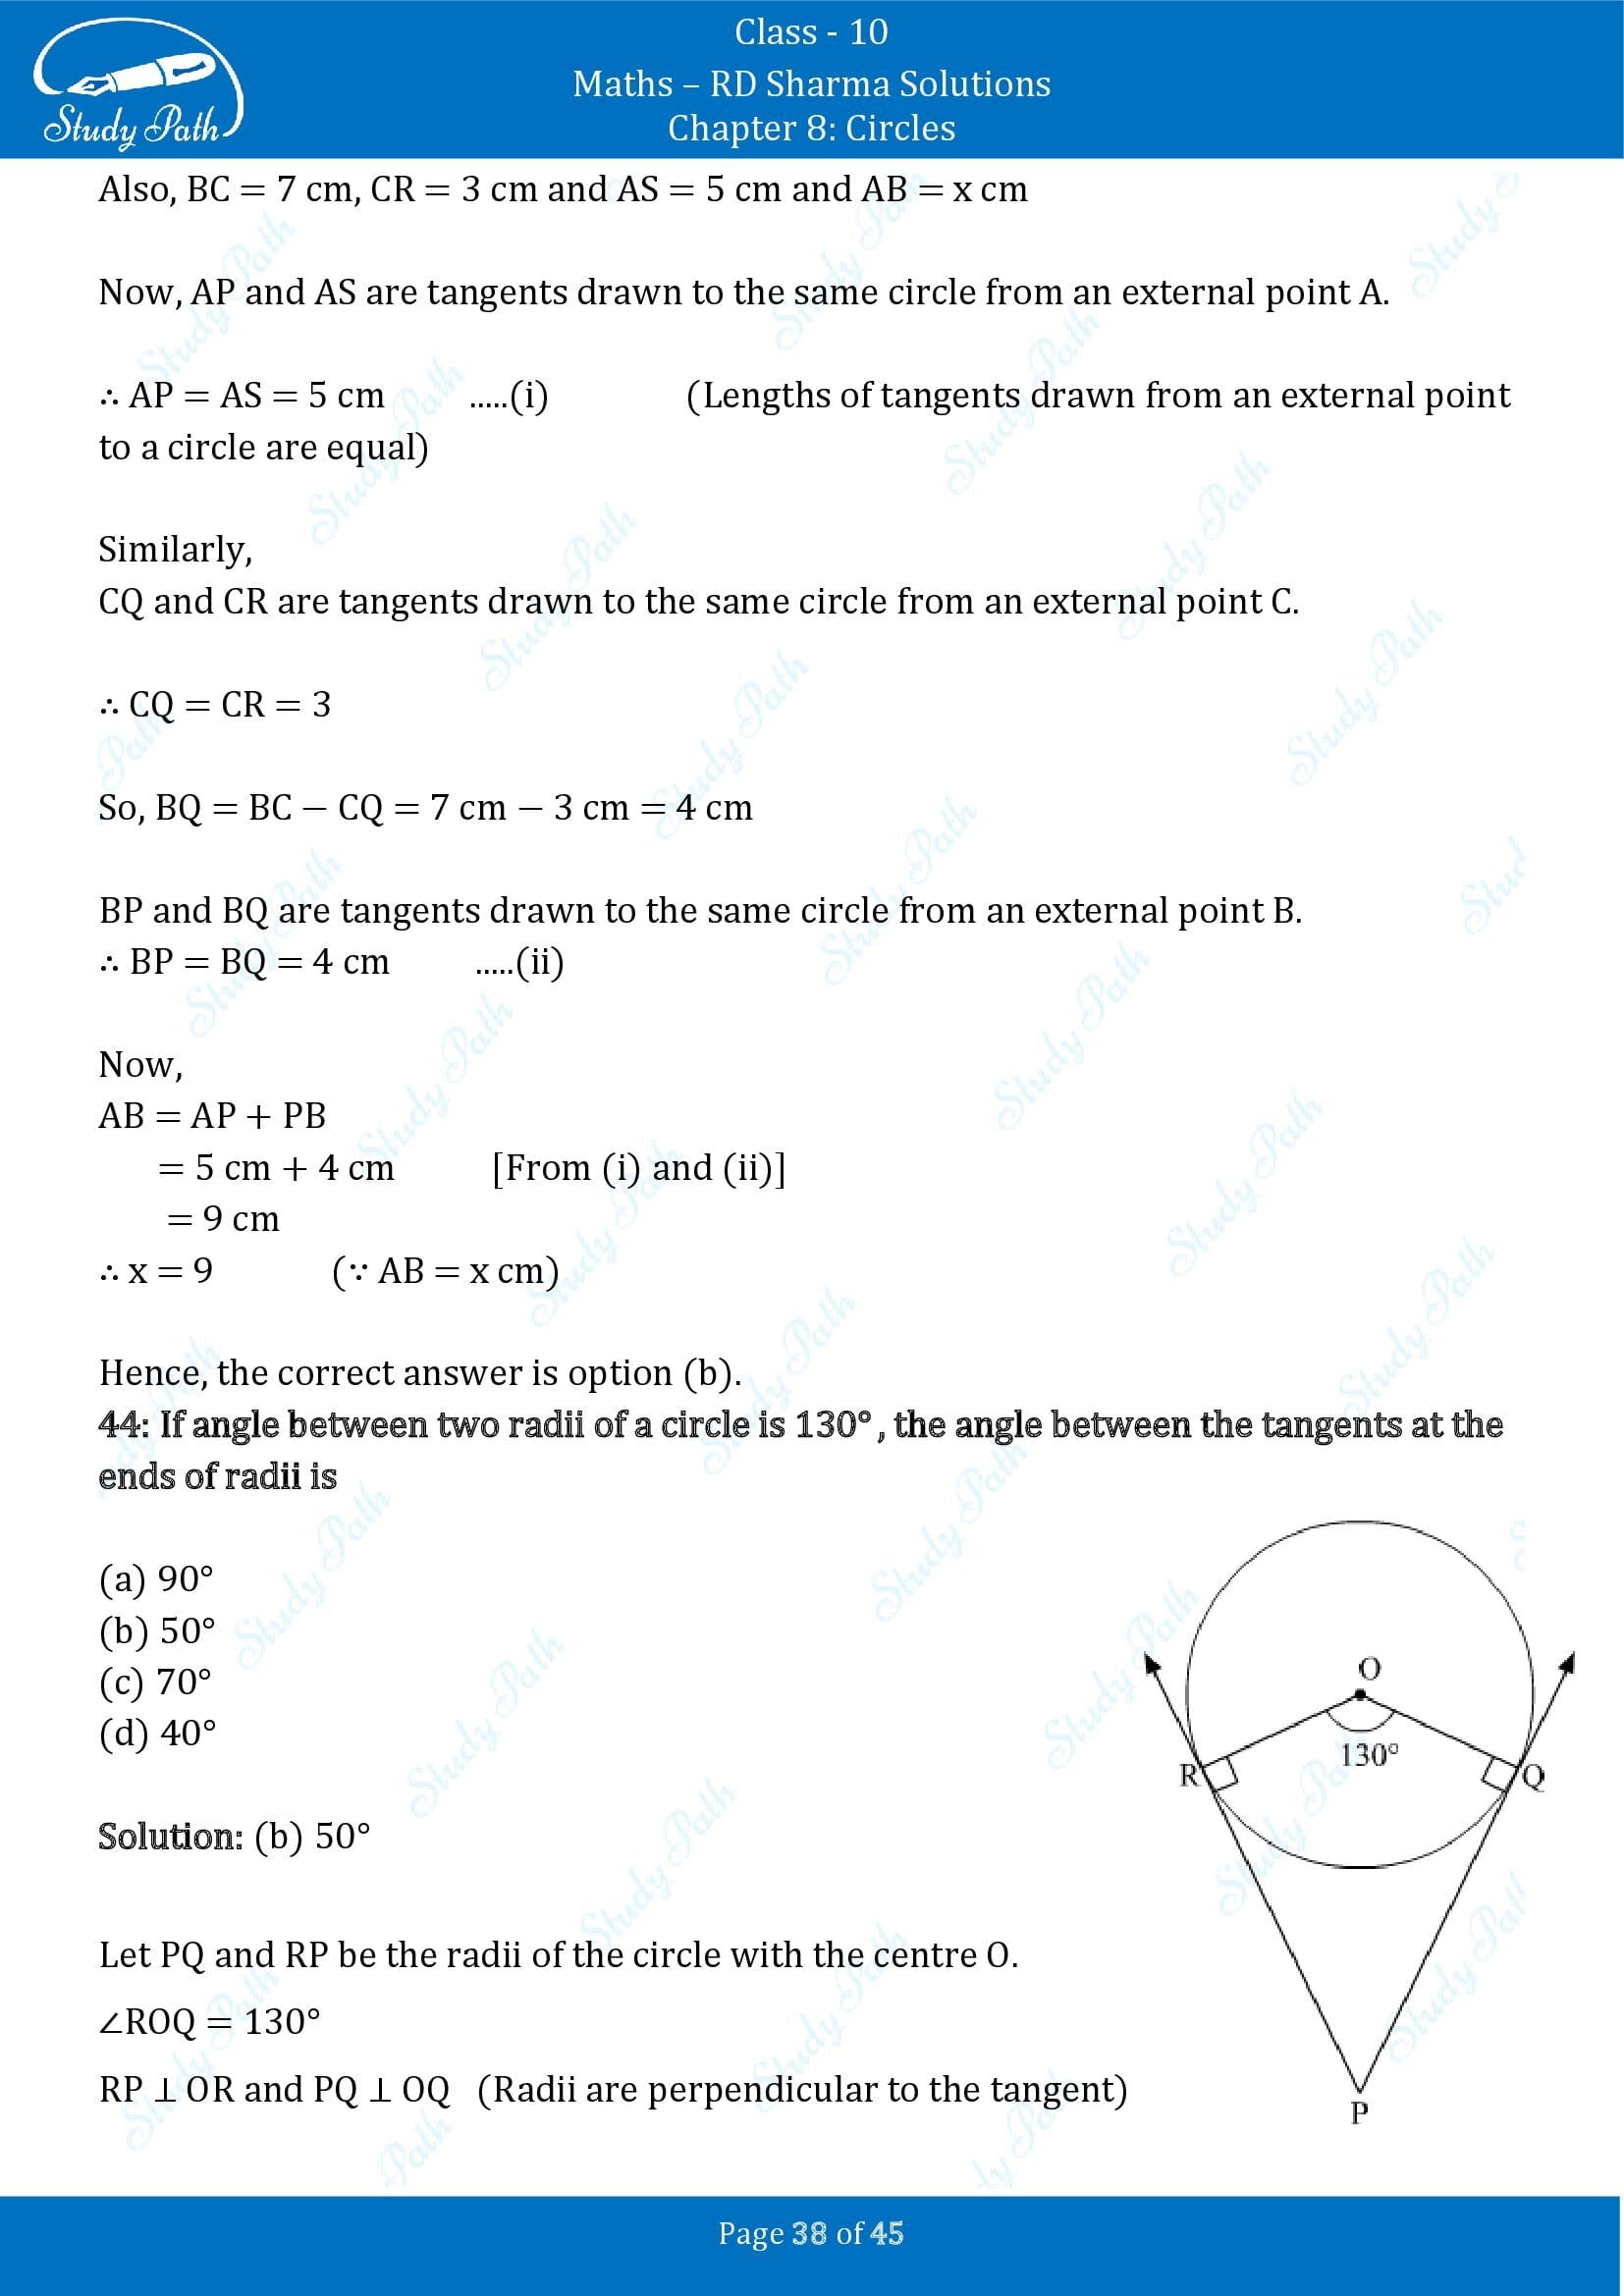 RD Sharma Solutions Class 10 Chapter 8 Circles Multiple Choice Questions MCQs 00038